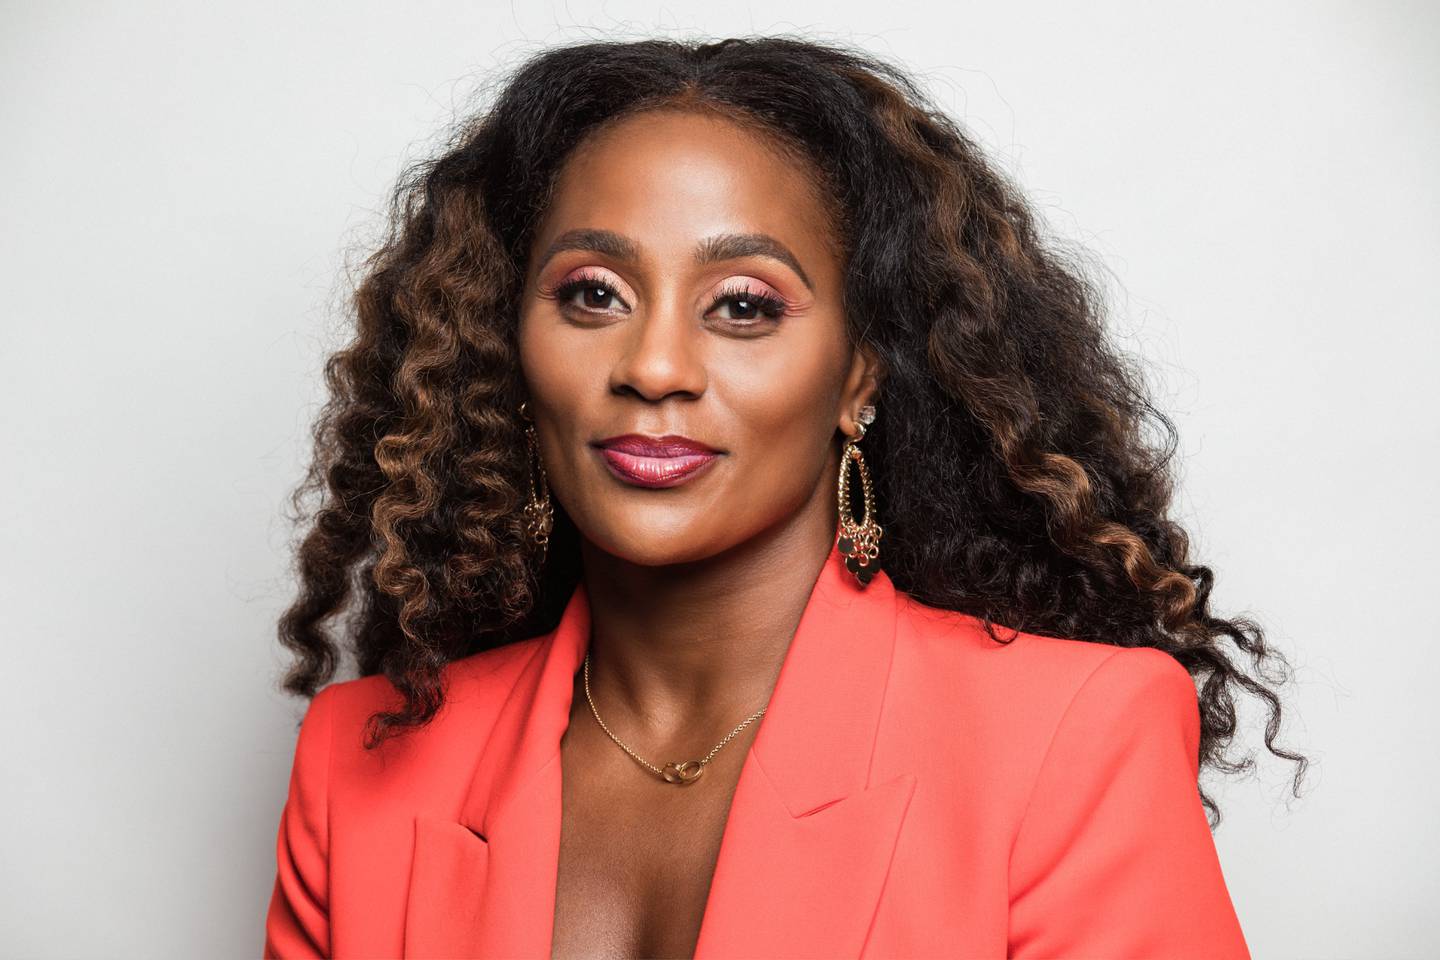 Marketing veteran Adrienne Lofton left Nike for Google this month to "supercharge" her career. Courtesy.